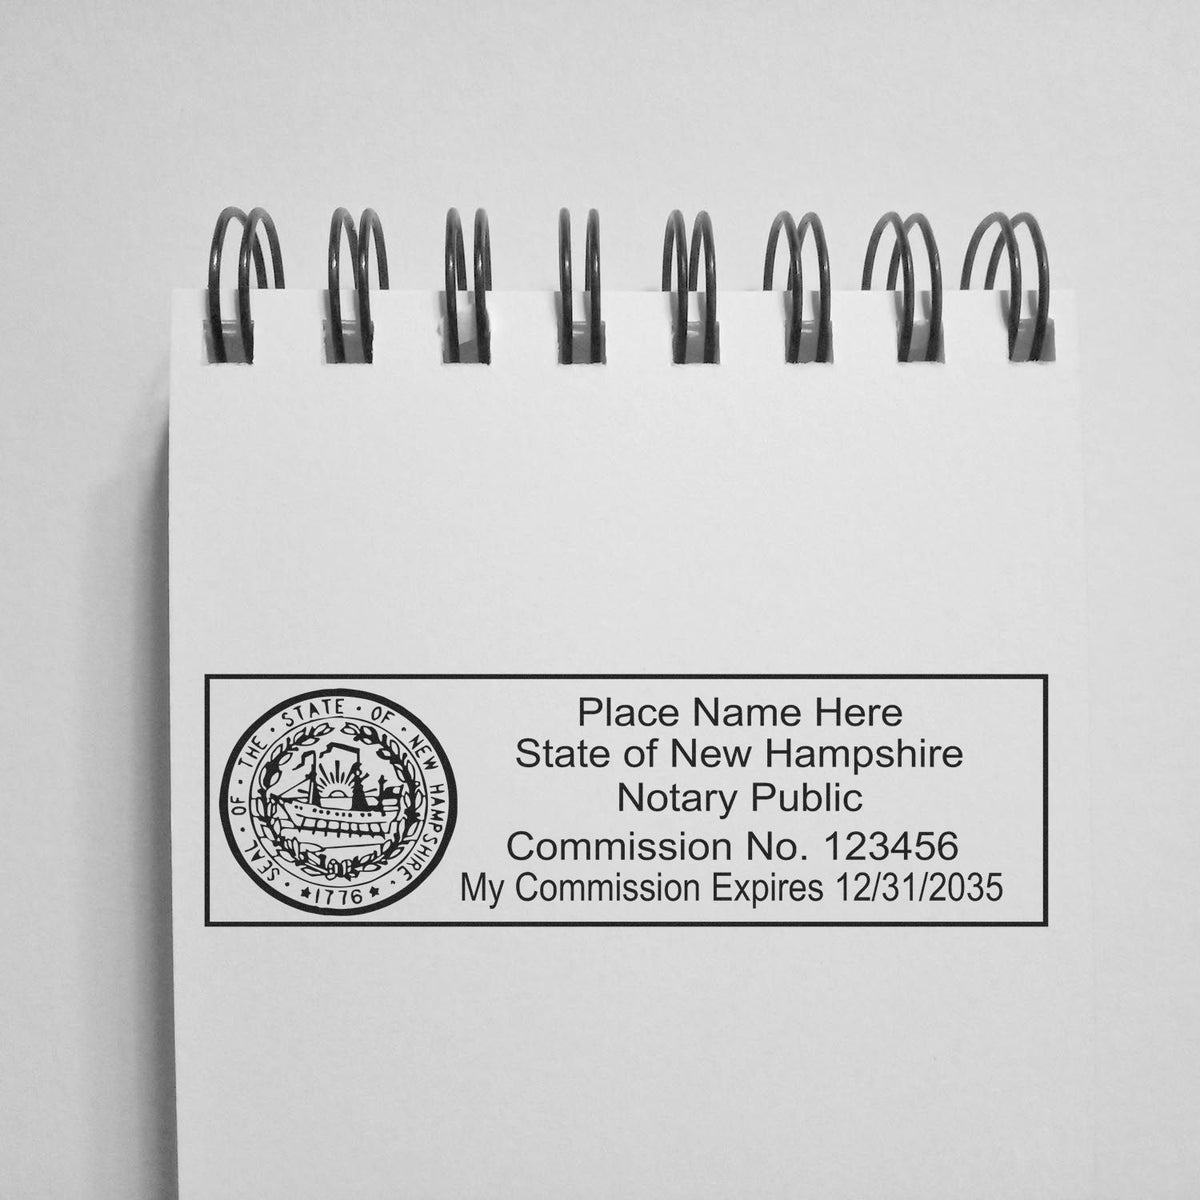 The Super Slim New Hampshire Notary Public Stamp stamp impression comes to life with a crisp, detailed photo on paper - showcasing true professional quality.